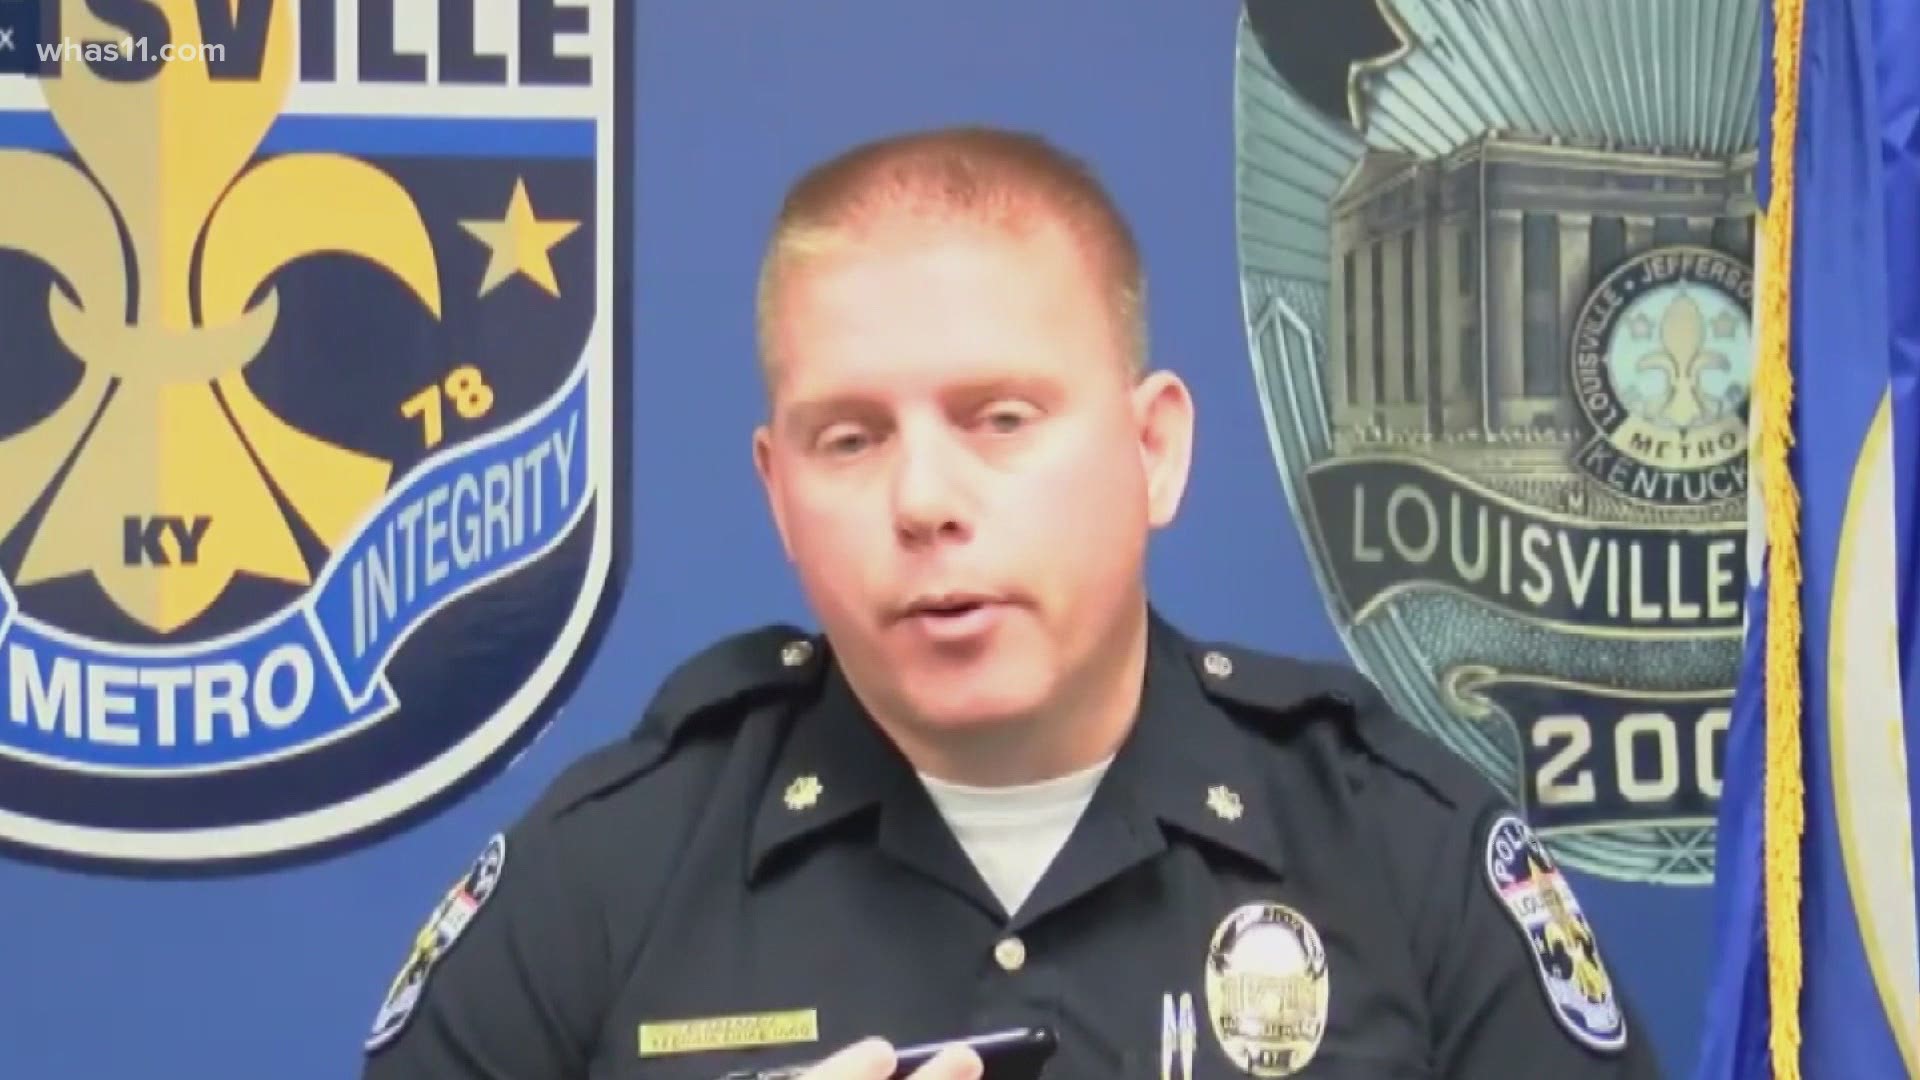 According to Louisville Metro Police, Maj. Aubrey Gregory is on administrative leave after allegations he used offensive derogatory language in a training session.